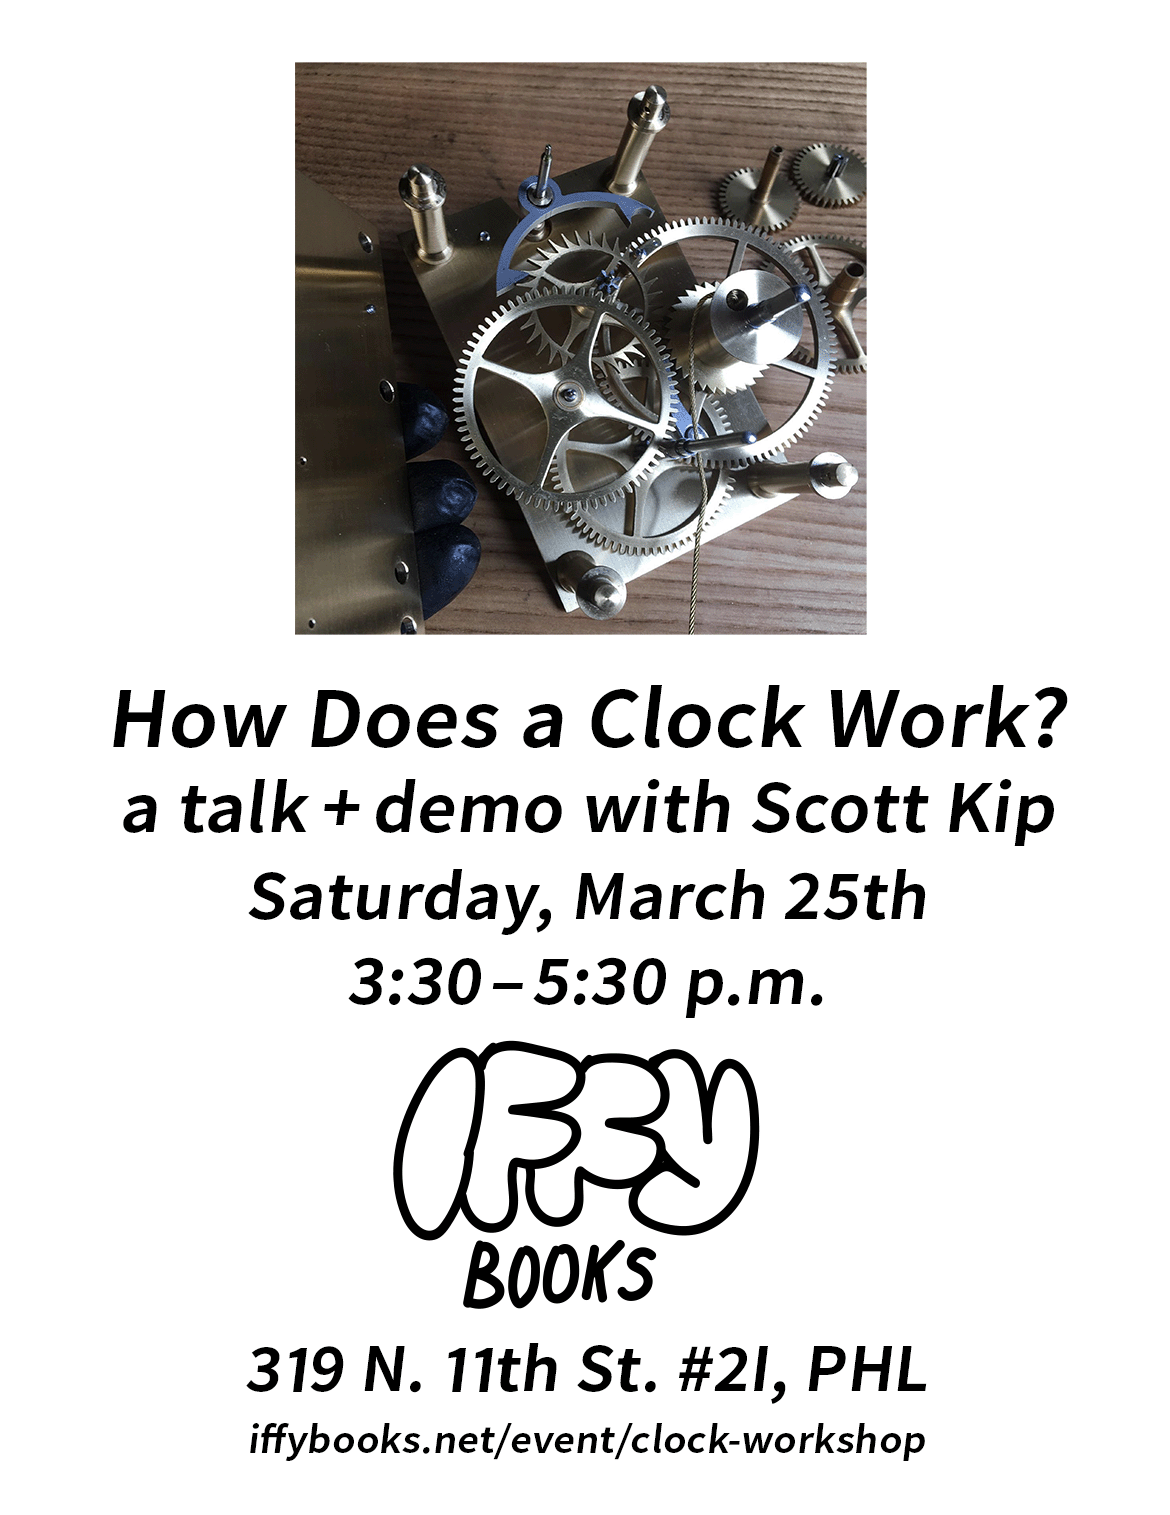 Flyer with a photo of a partially assembled clock and the following text: How Does a Clock Work? a talk + demo with Scott Kip / Saturday, March 25th / 3:30–5:30 p.m. / Iffy Books / 319 N. 11th St. #2I, PHL / iffybooks.net/event/clock-workshop